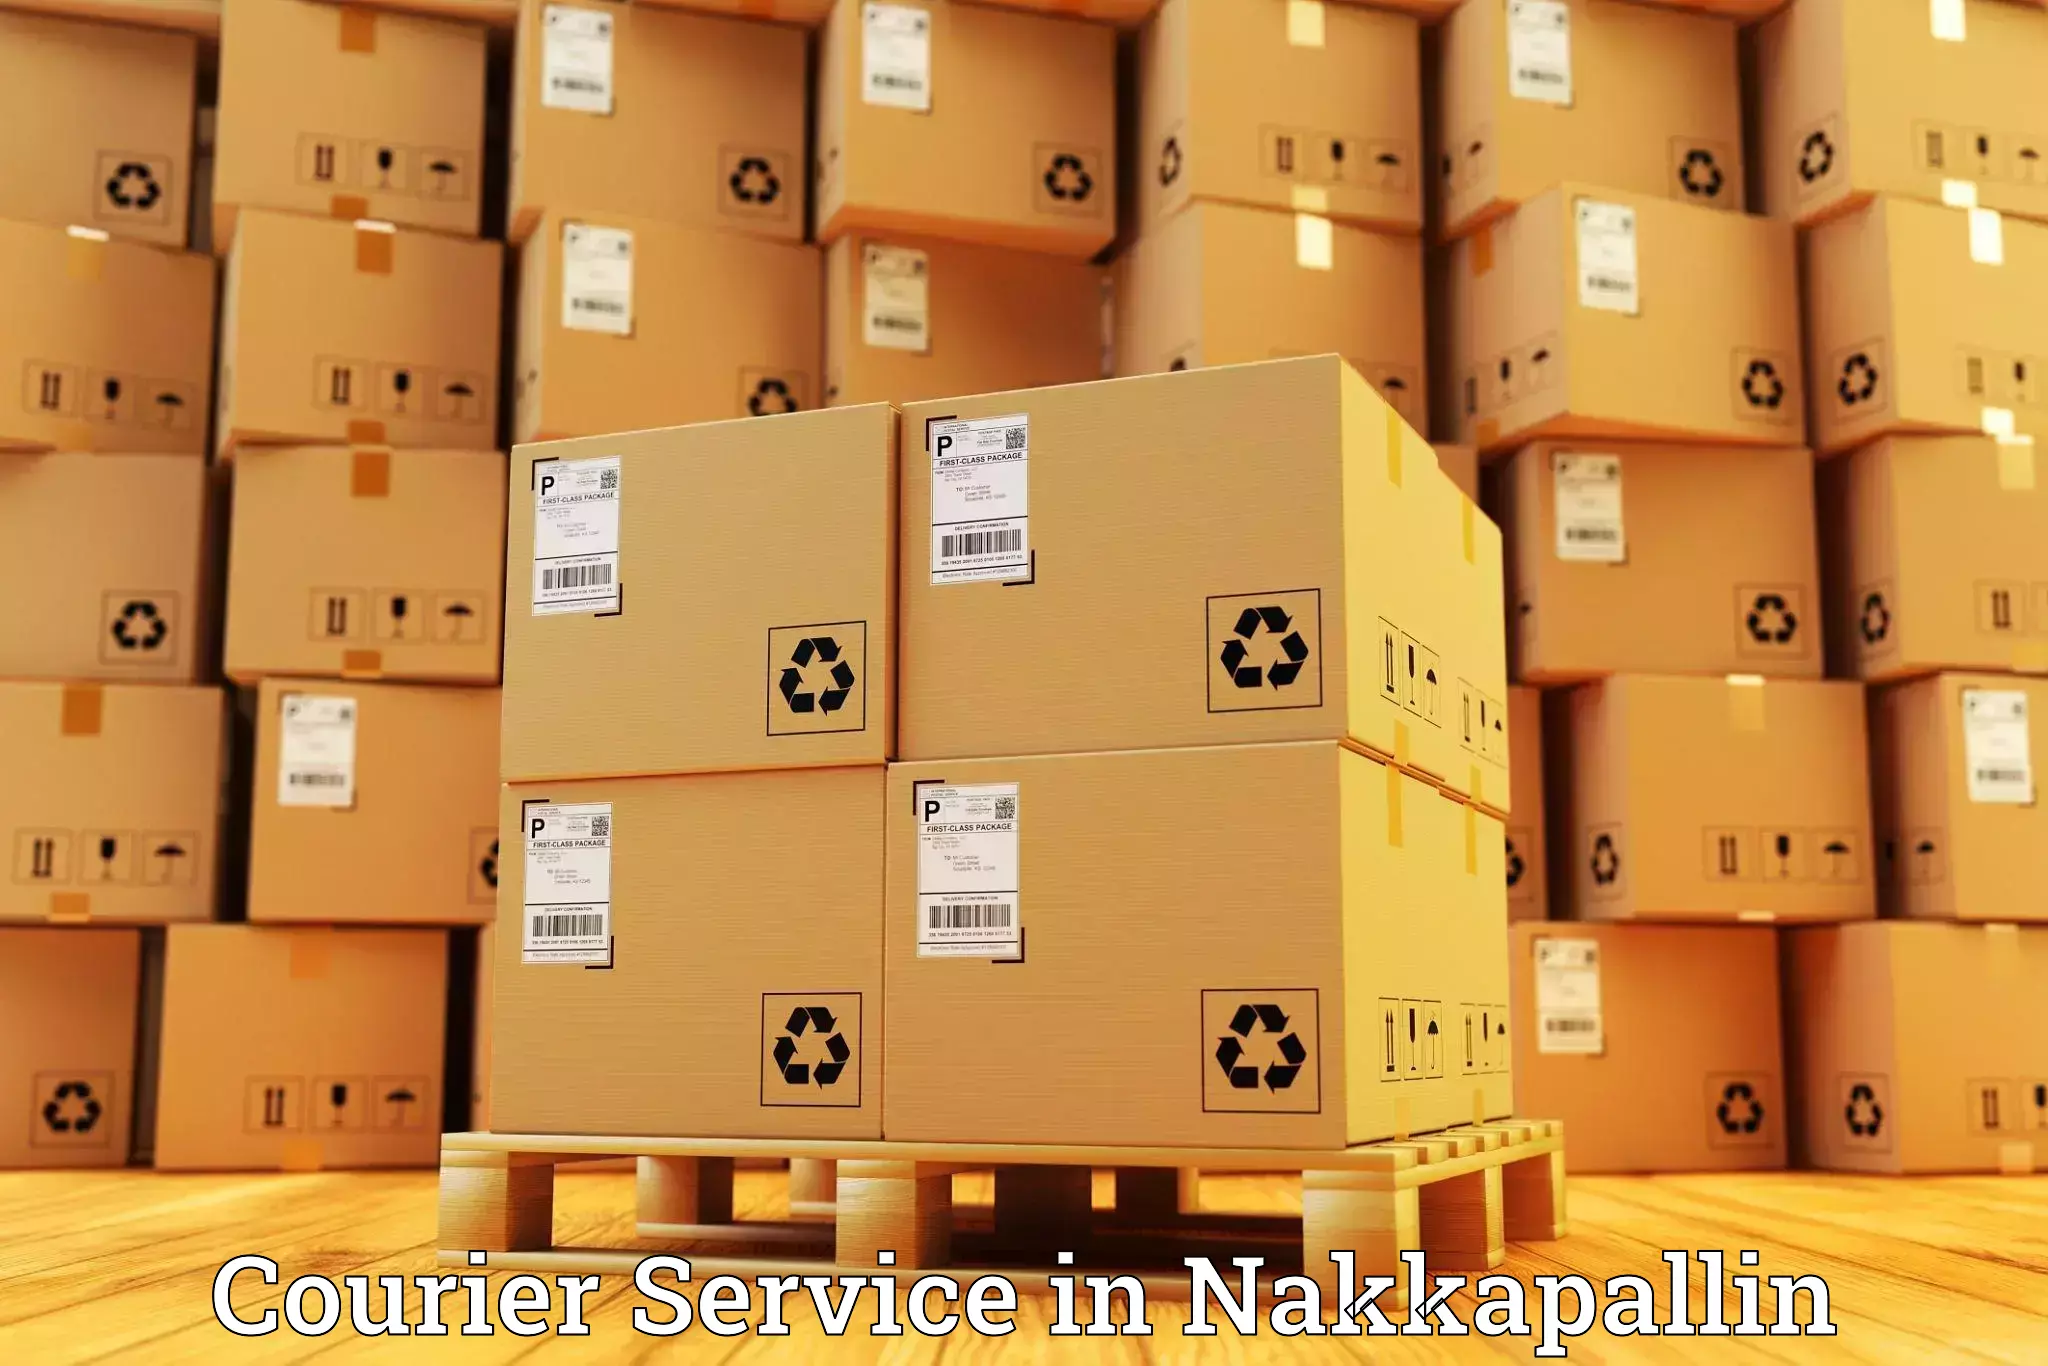 Customer-oriented courier services in Nakkapallin